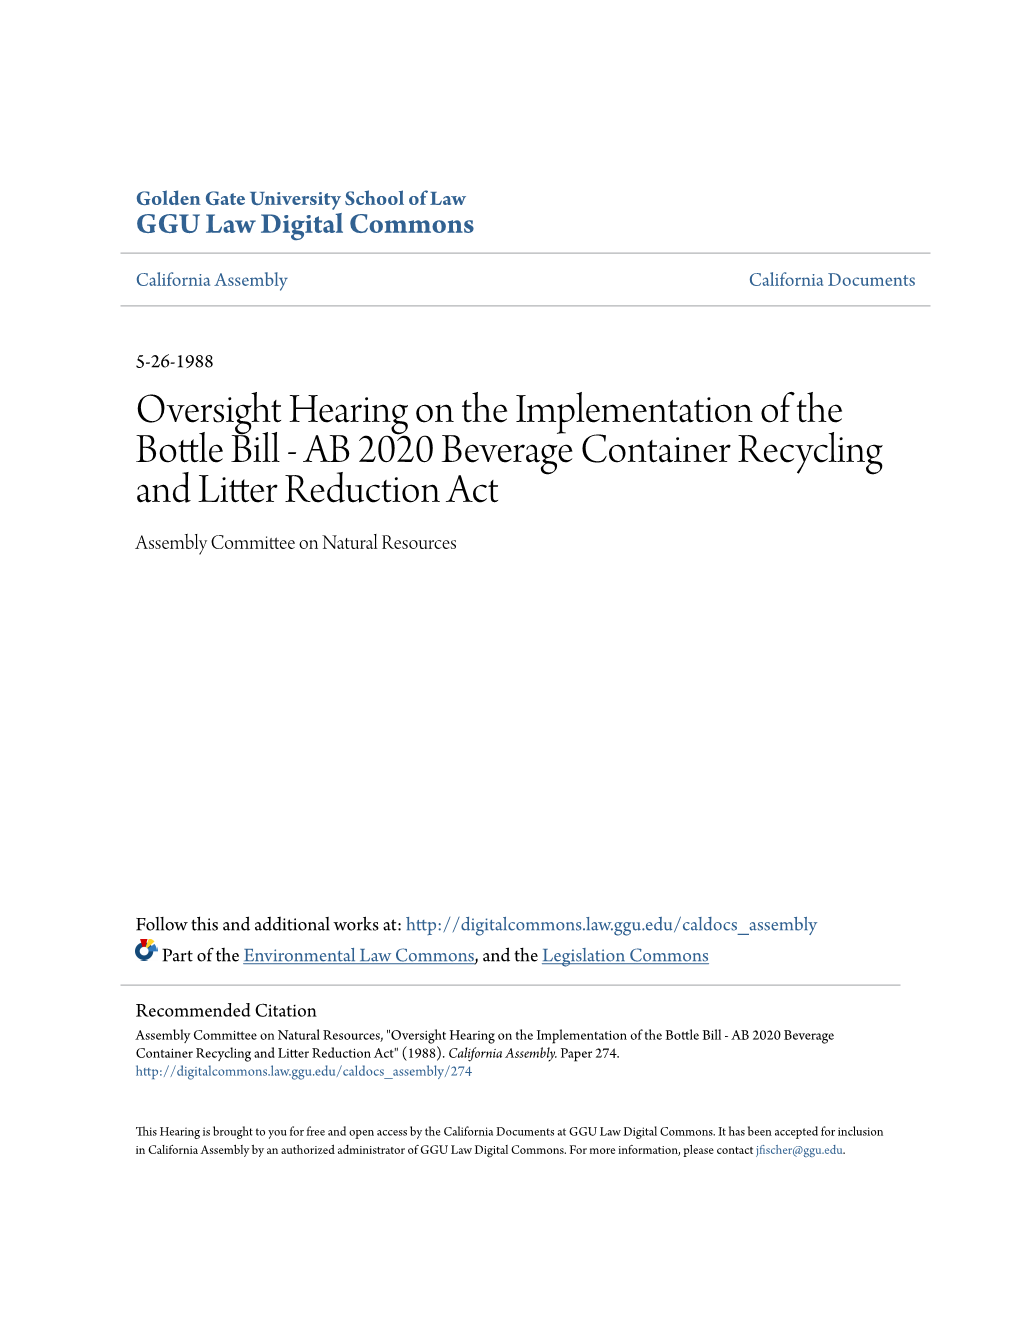 AB 2020 Beverage Container Recycling and Litter Reduction Act Assembly Committee on Natural Resources